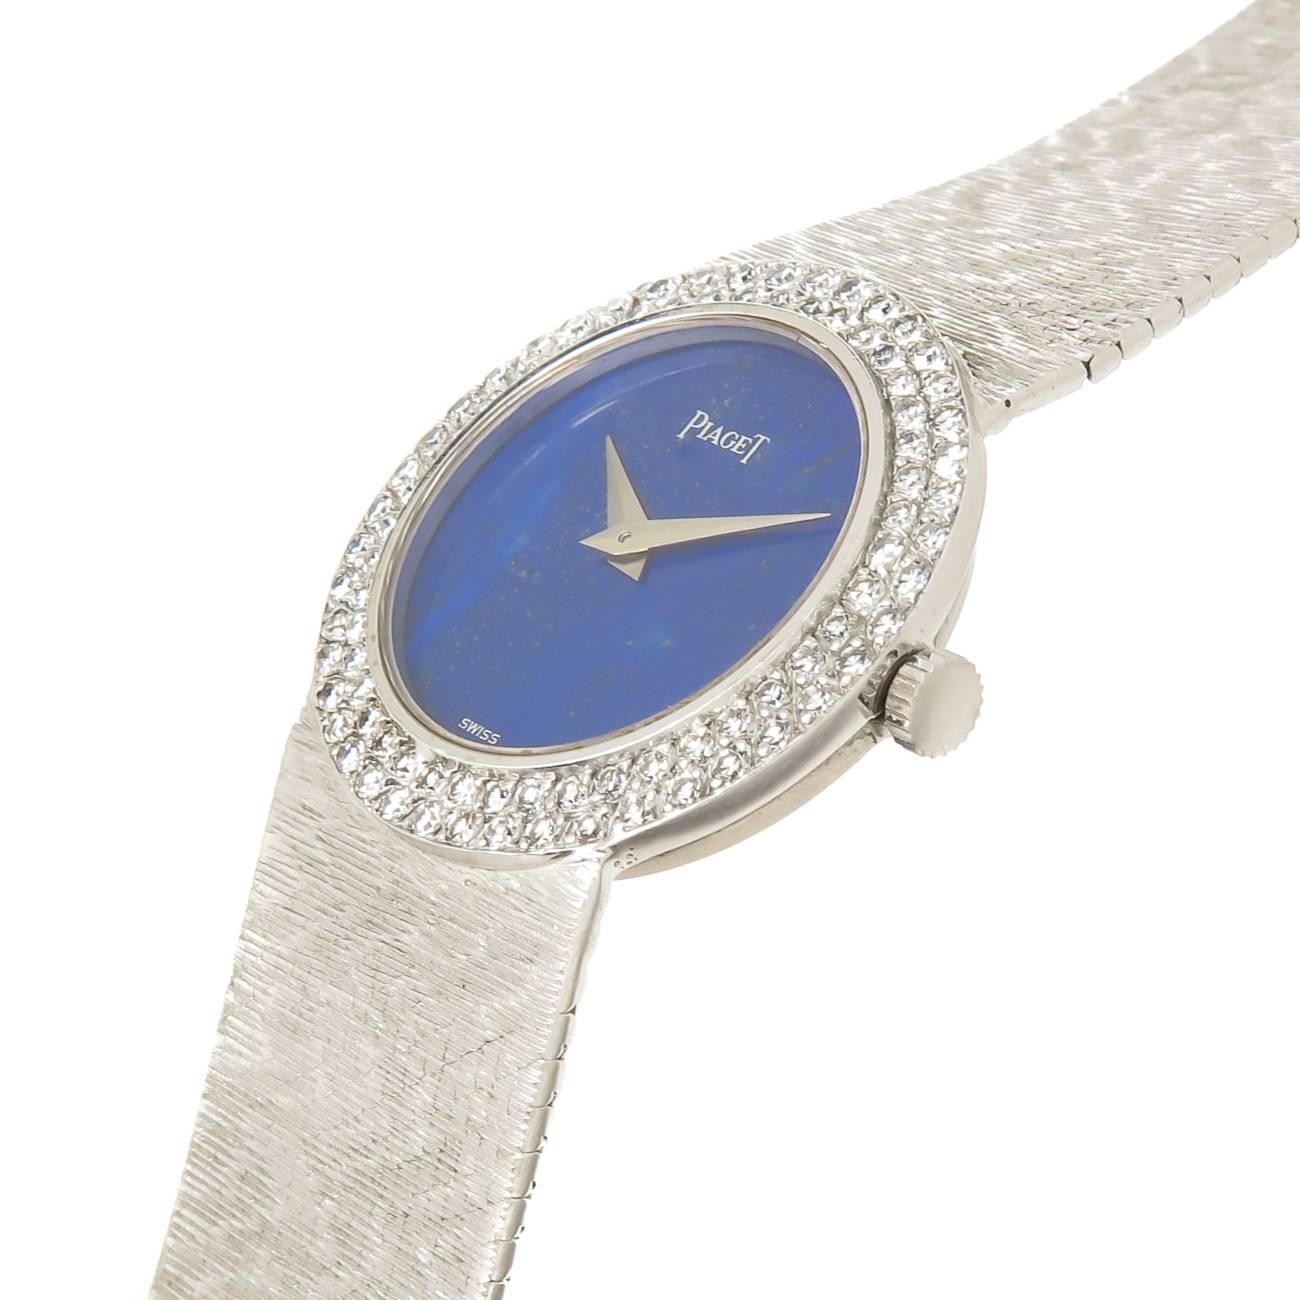 Circa 1980 Piaget Ladies Wrist watch, 24 MM 18K White Gold case with Factory Double Row Diamond set bezel totaling approxi mately 1.50 Carat. Mechanical, manual wind Movement, Lapis Lazuli Dial with White Gold hands. 5/8 inch wide 18K White Gold